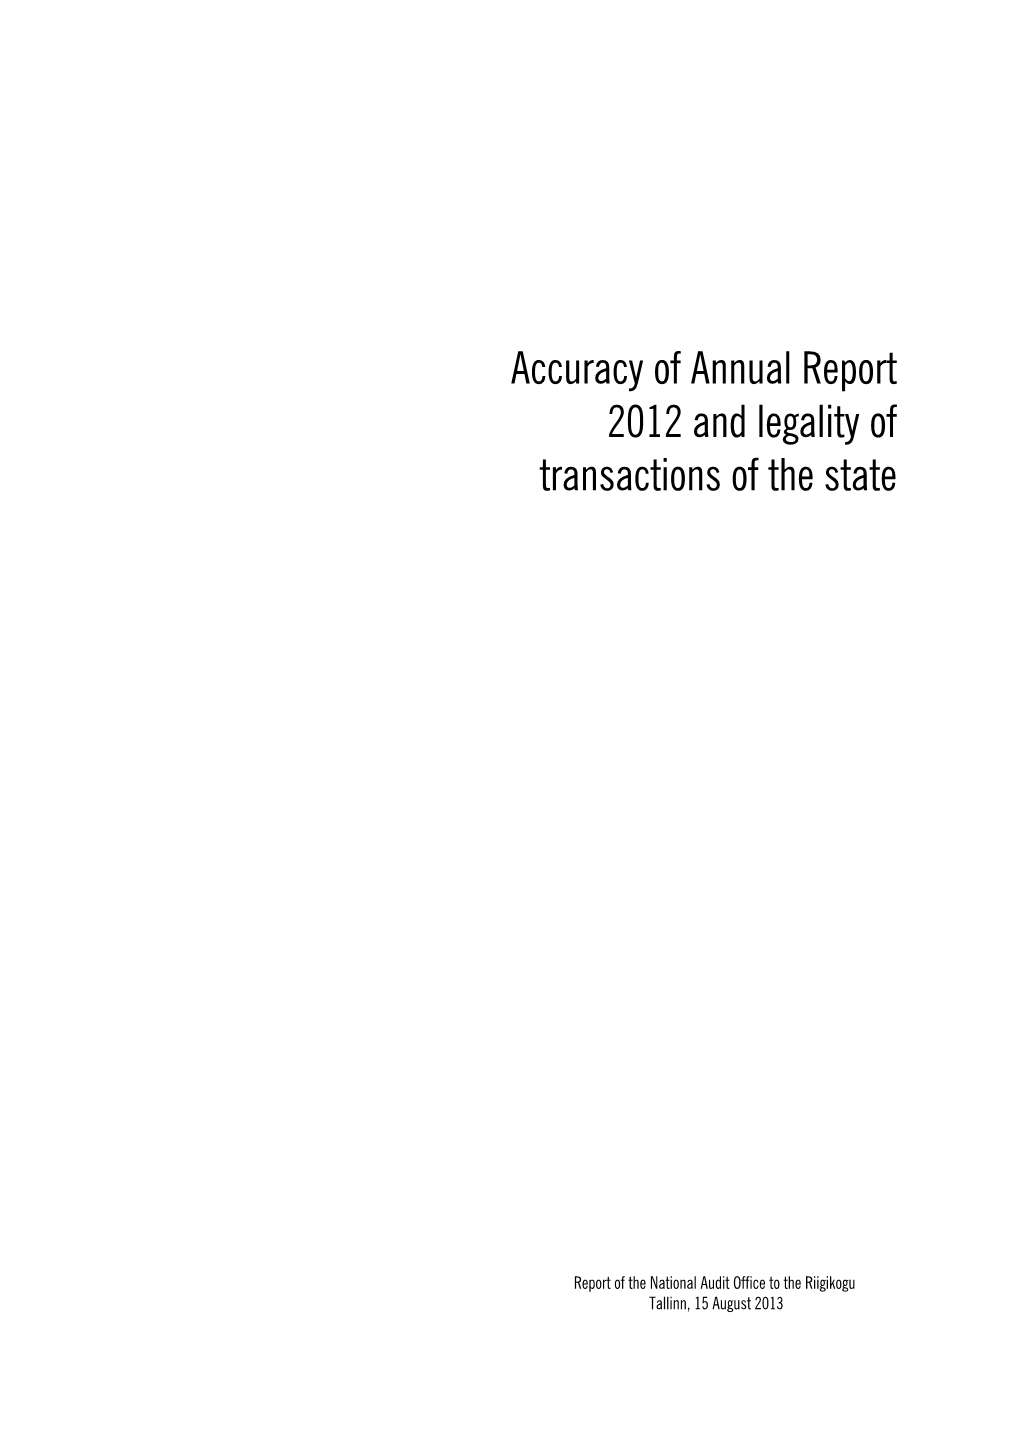 Accuracy of Annual Report 2012 and Legality of Transactions of the State